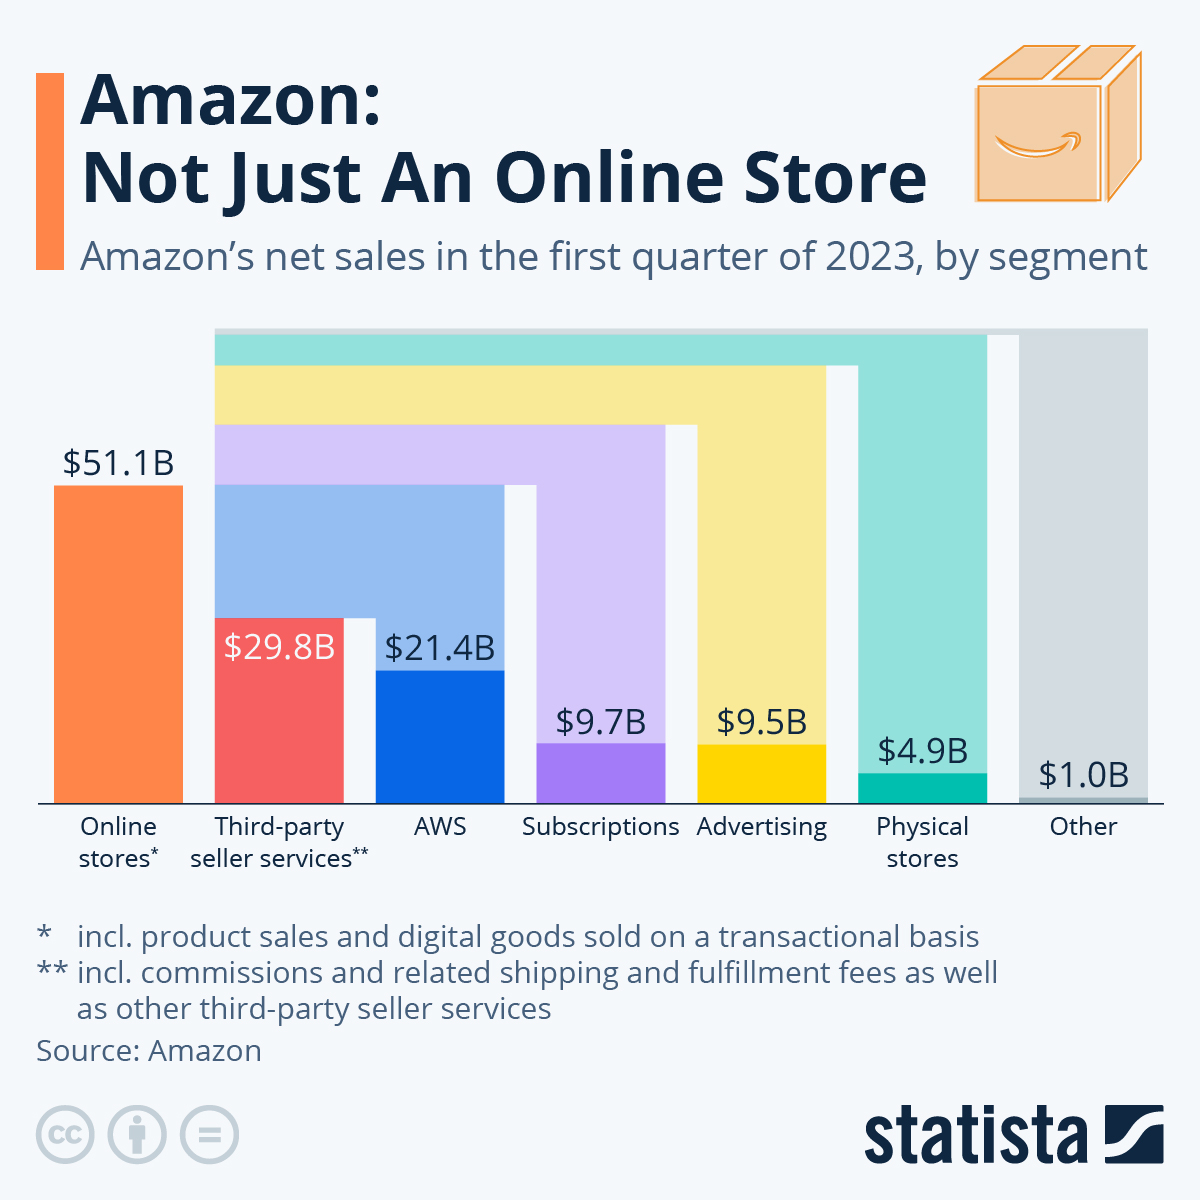 Amazon is Not Only an Online Store